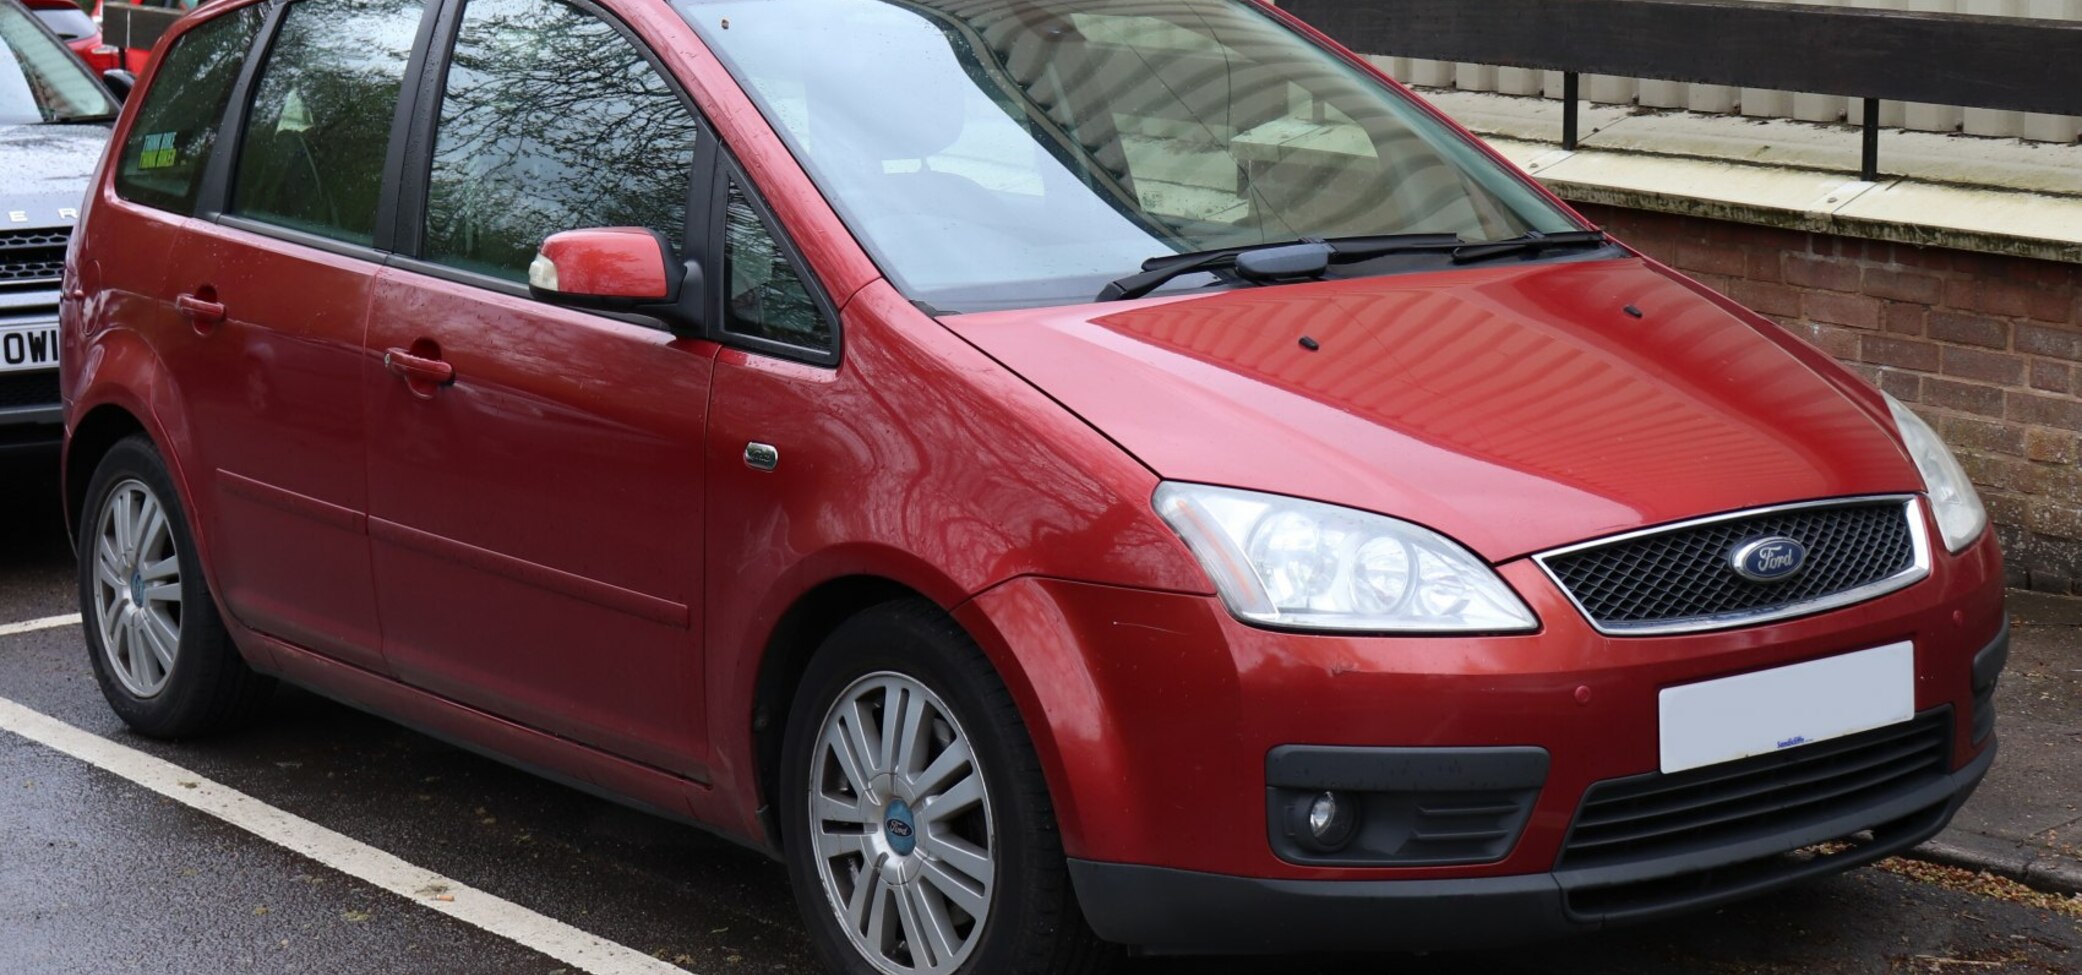 Ford C-MAX 2.0 (145/126 Hp) CNG 2006, 2007 